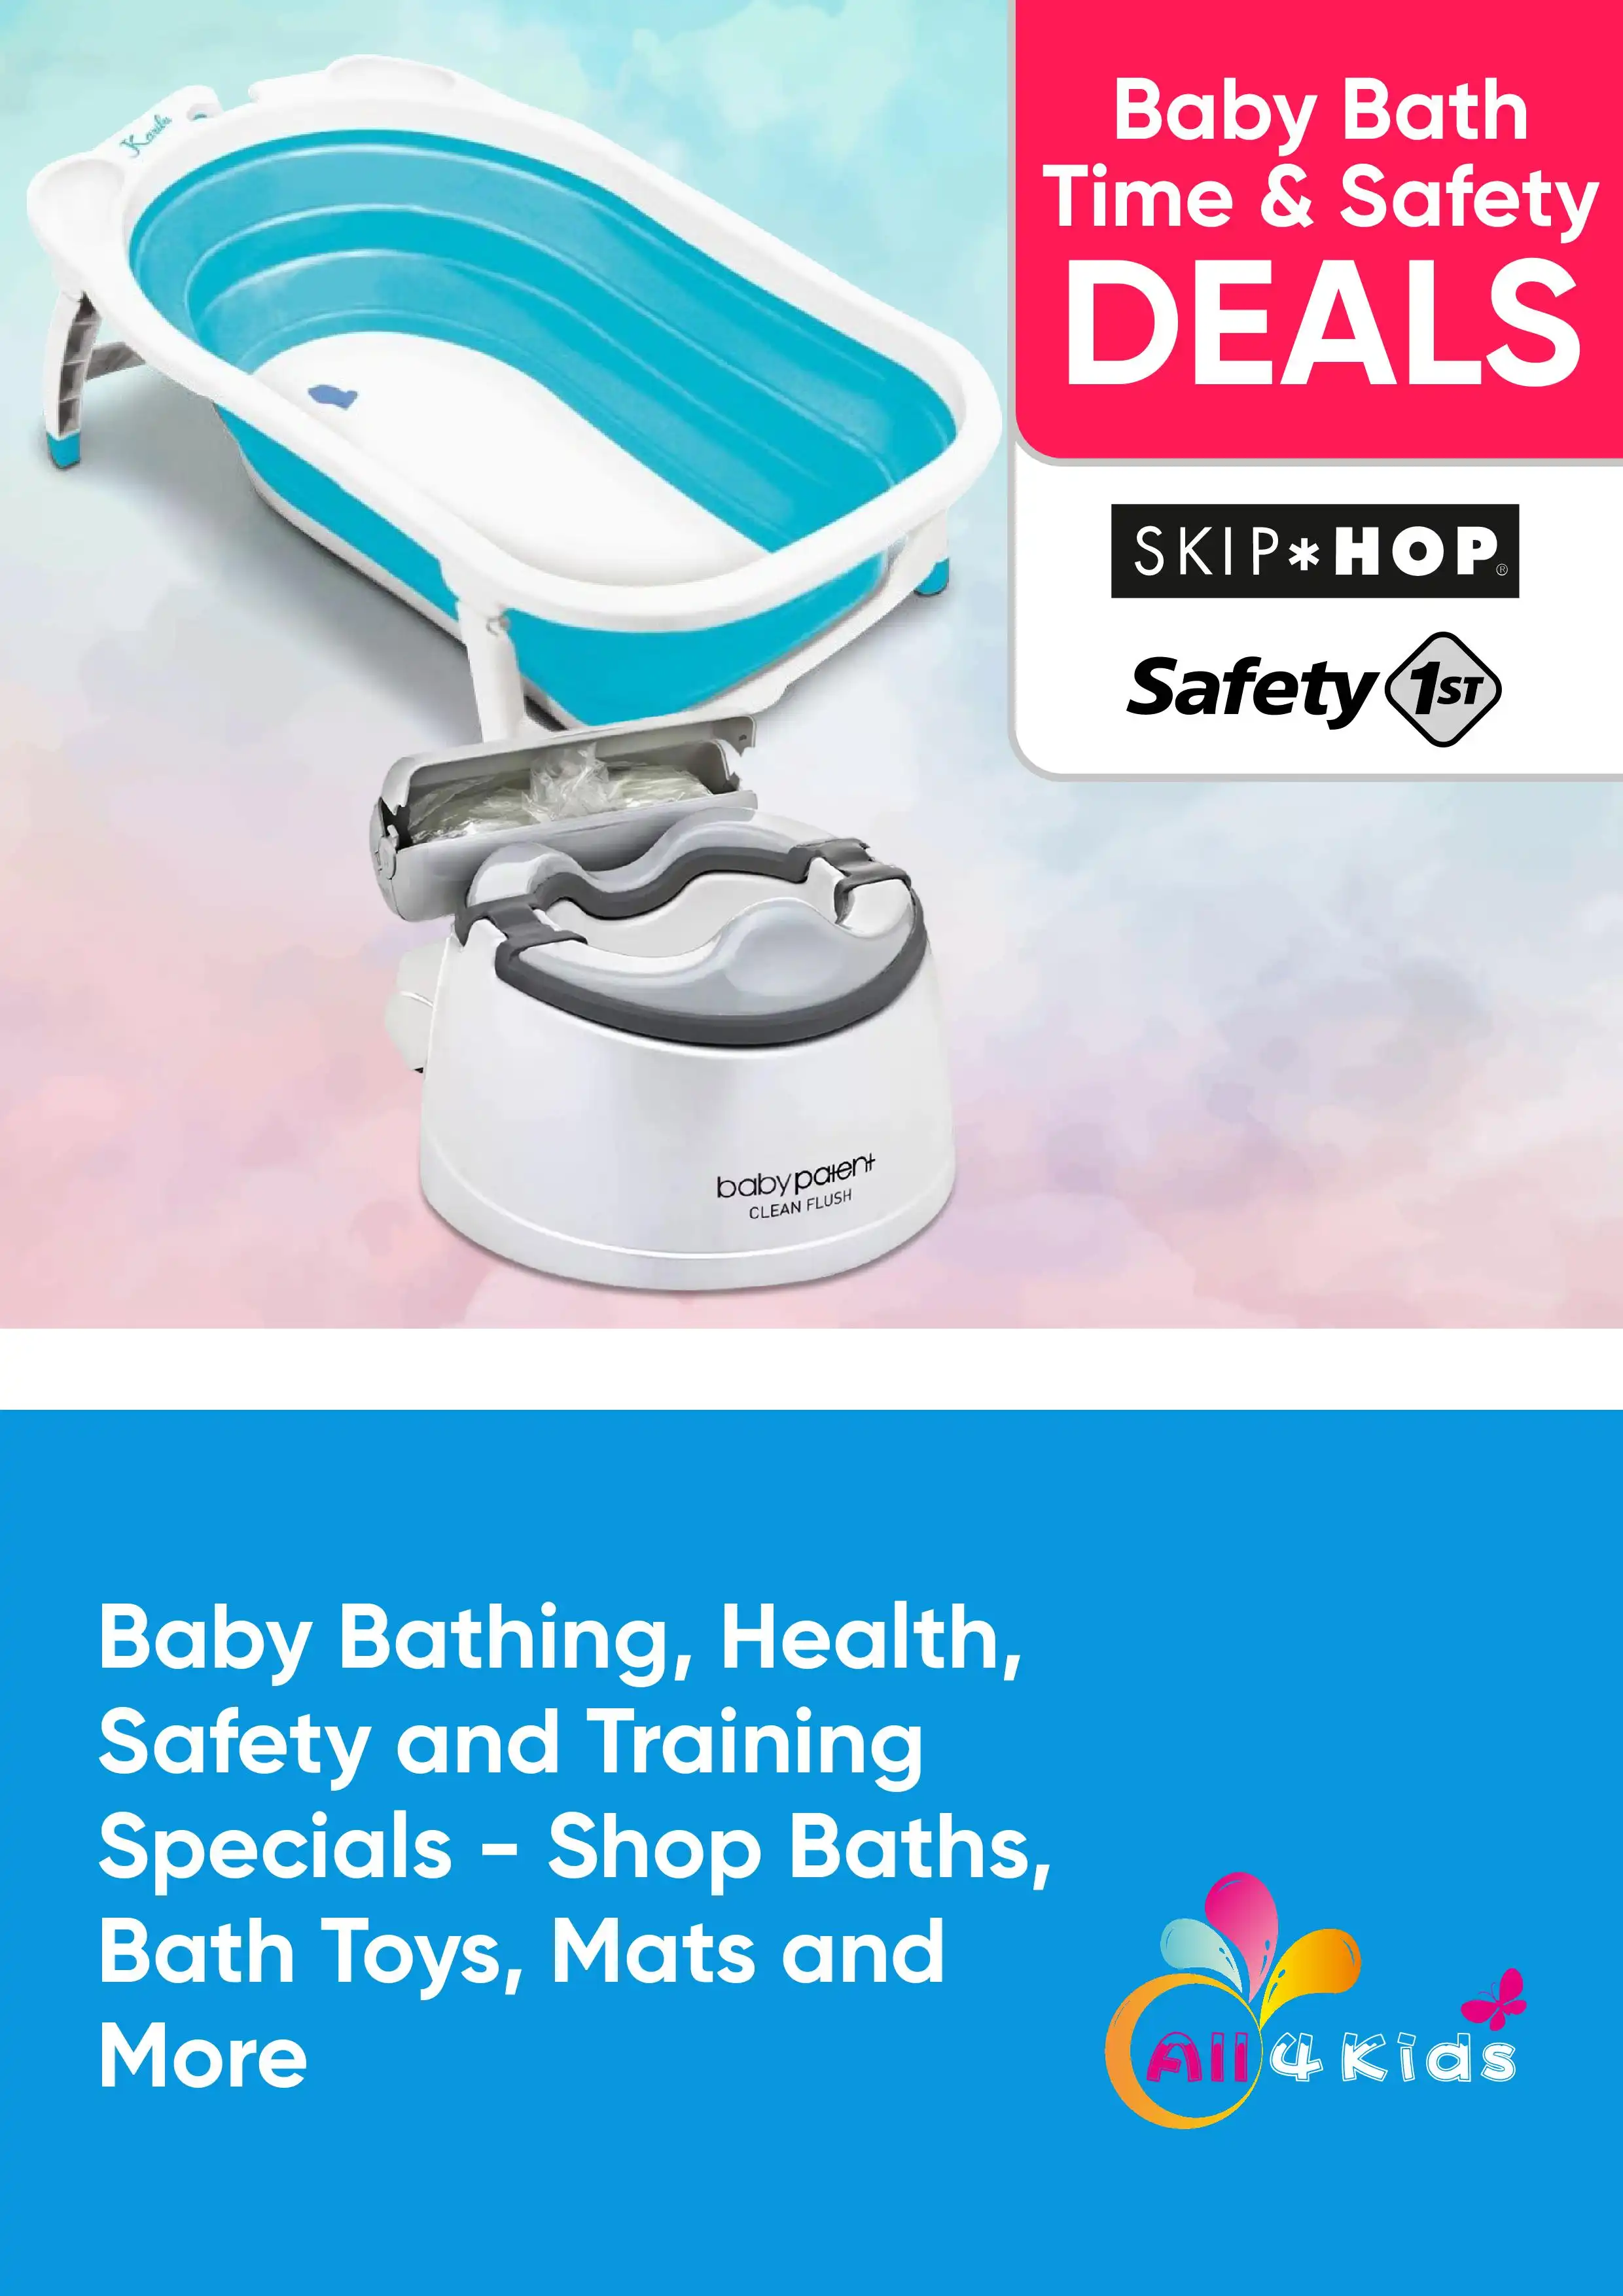 Baby Bathing, Health, Saftey and Potty Training Specials - Shop Baths, Bath Toys, Mats and More